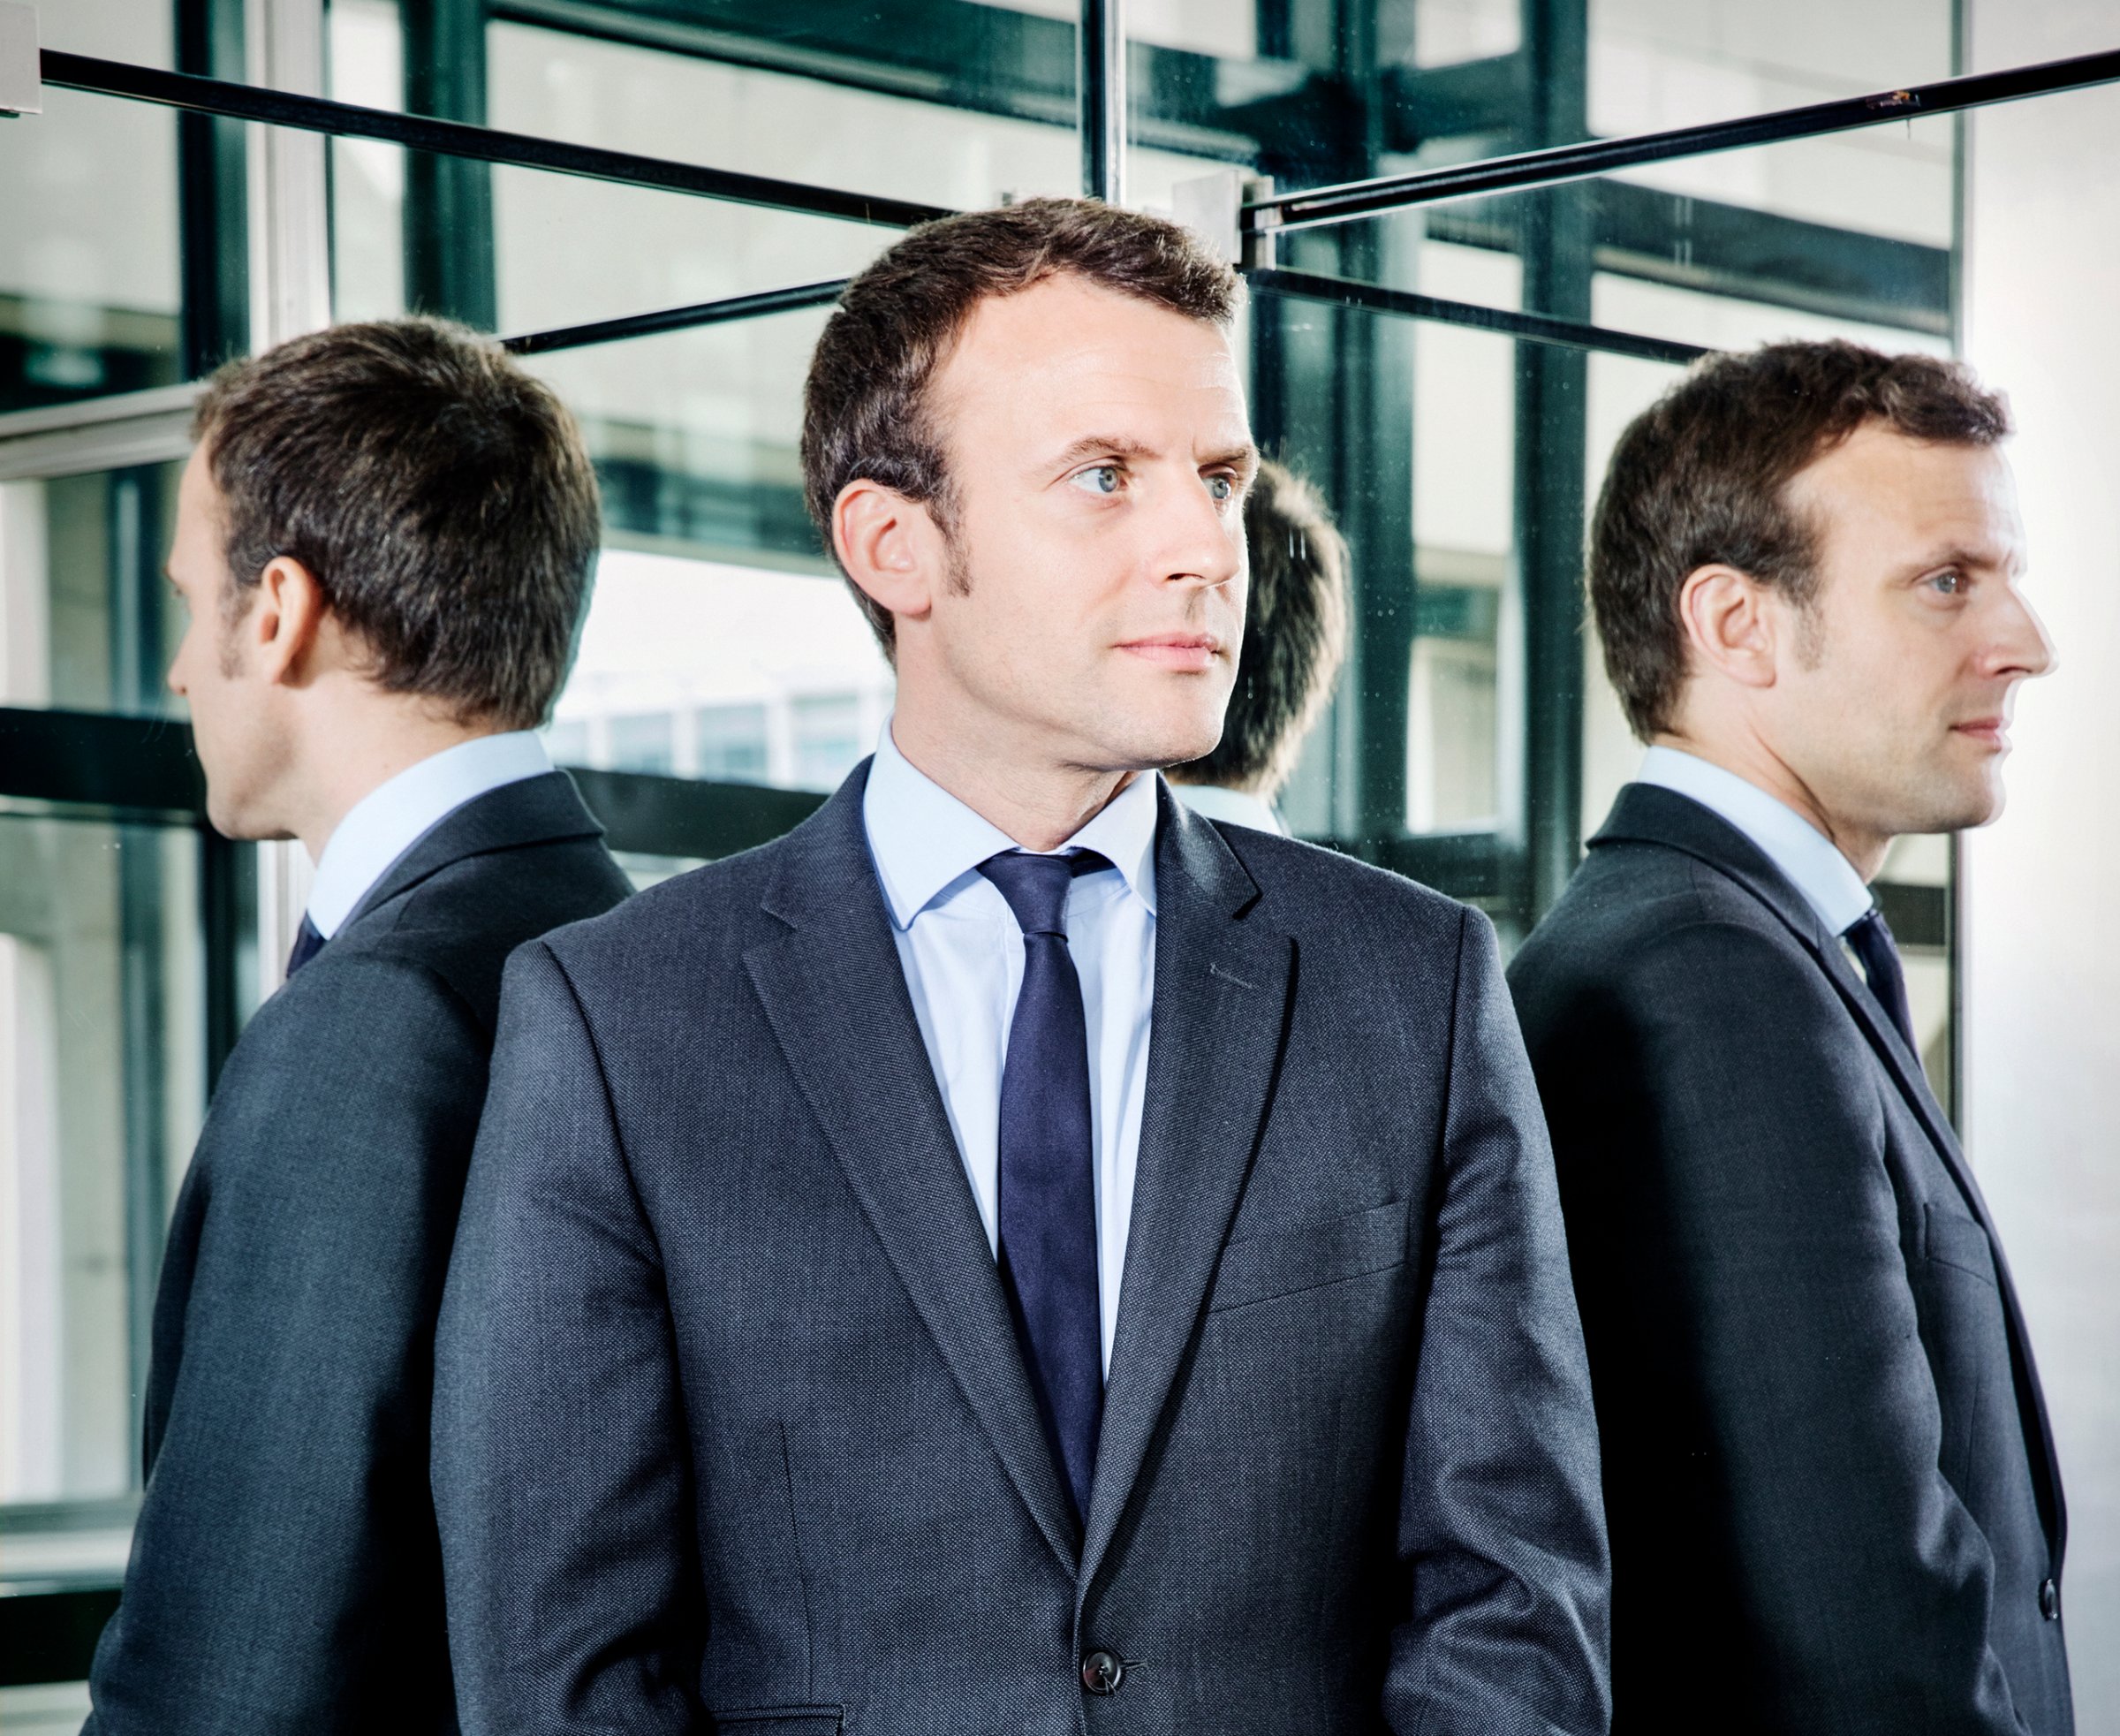 Emmanuel Macron, France's Minister for the Economy, Industry and Digital Affairs, in the Ministry of Economy and Finance in Paris on June 13, 2016.